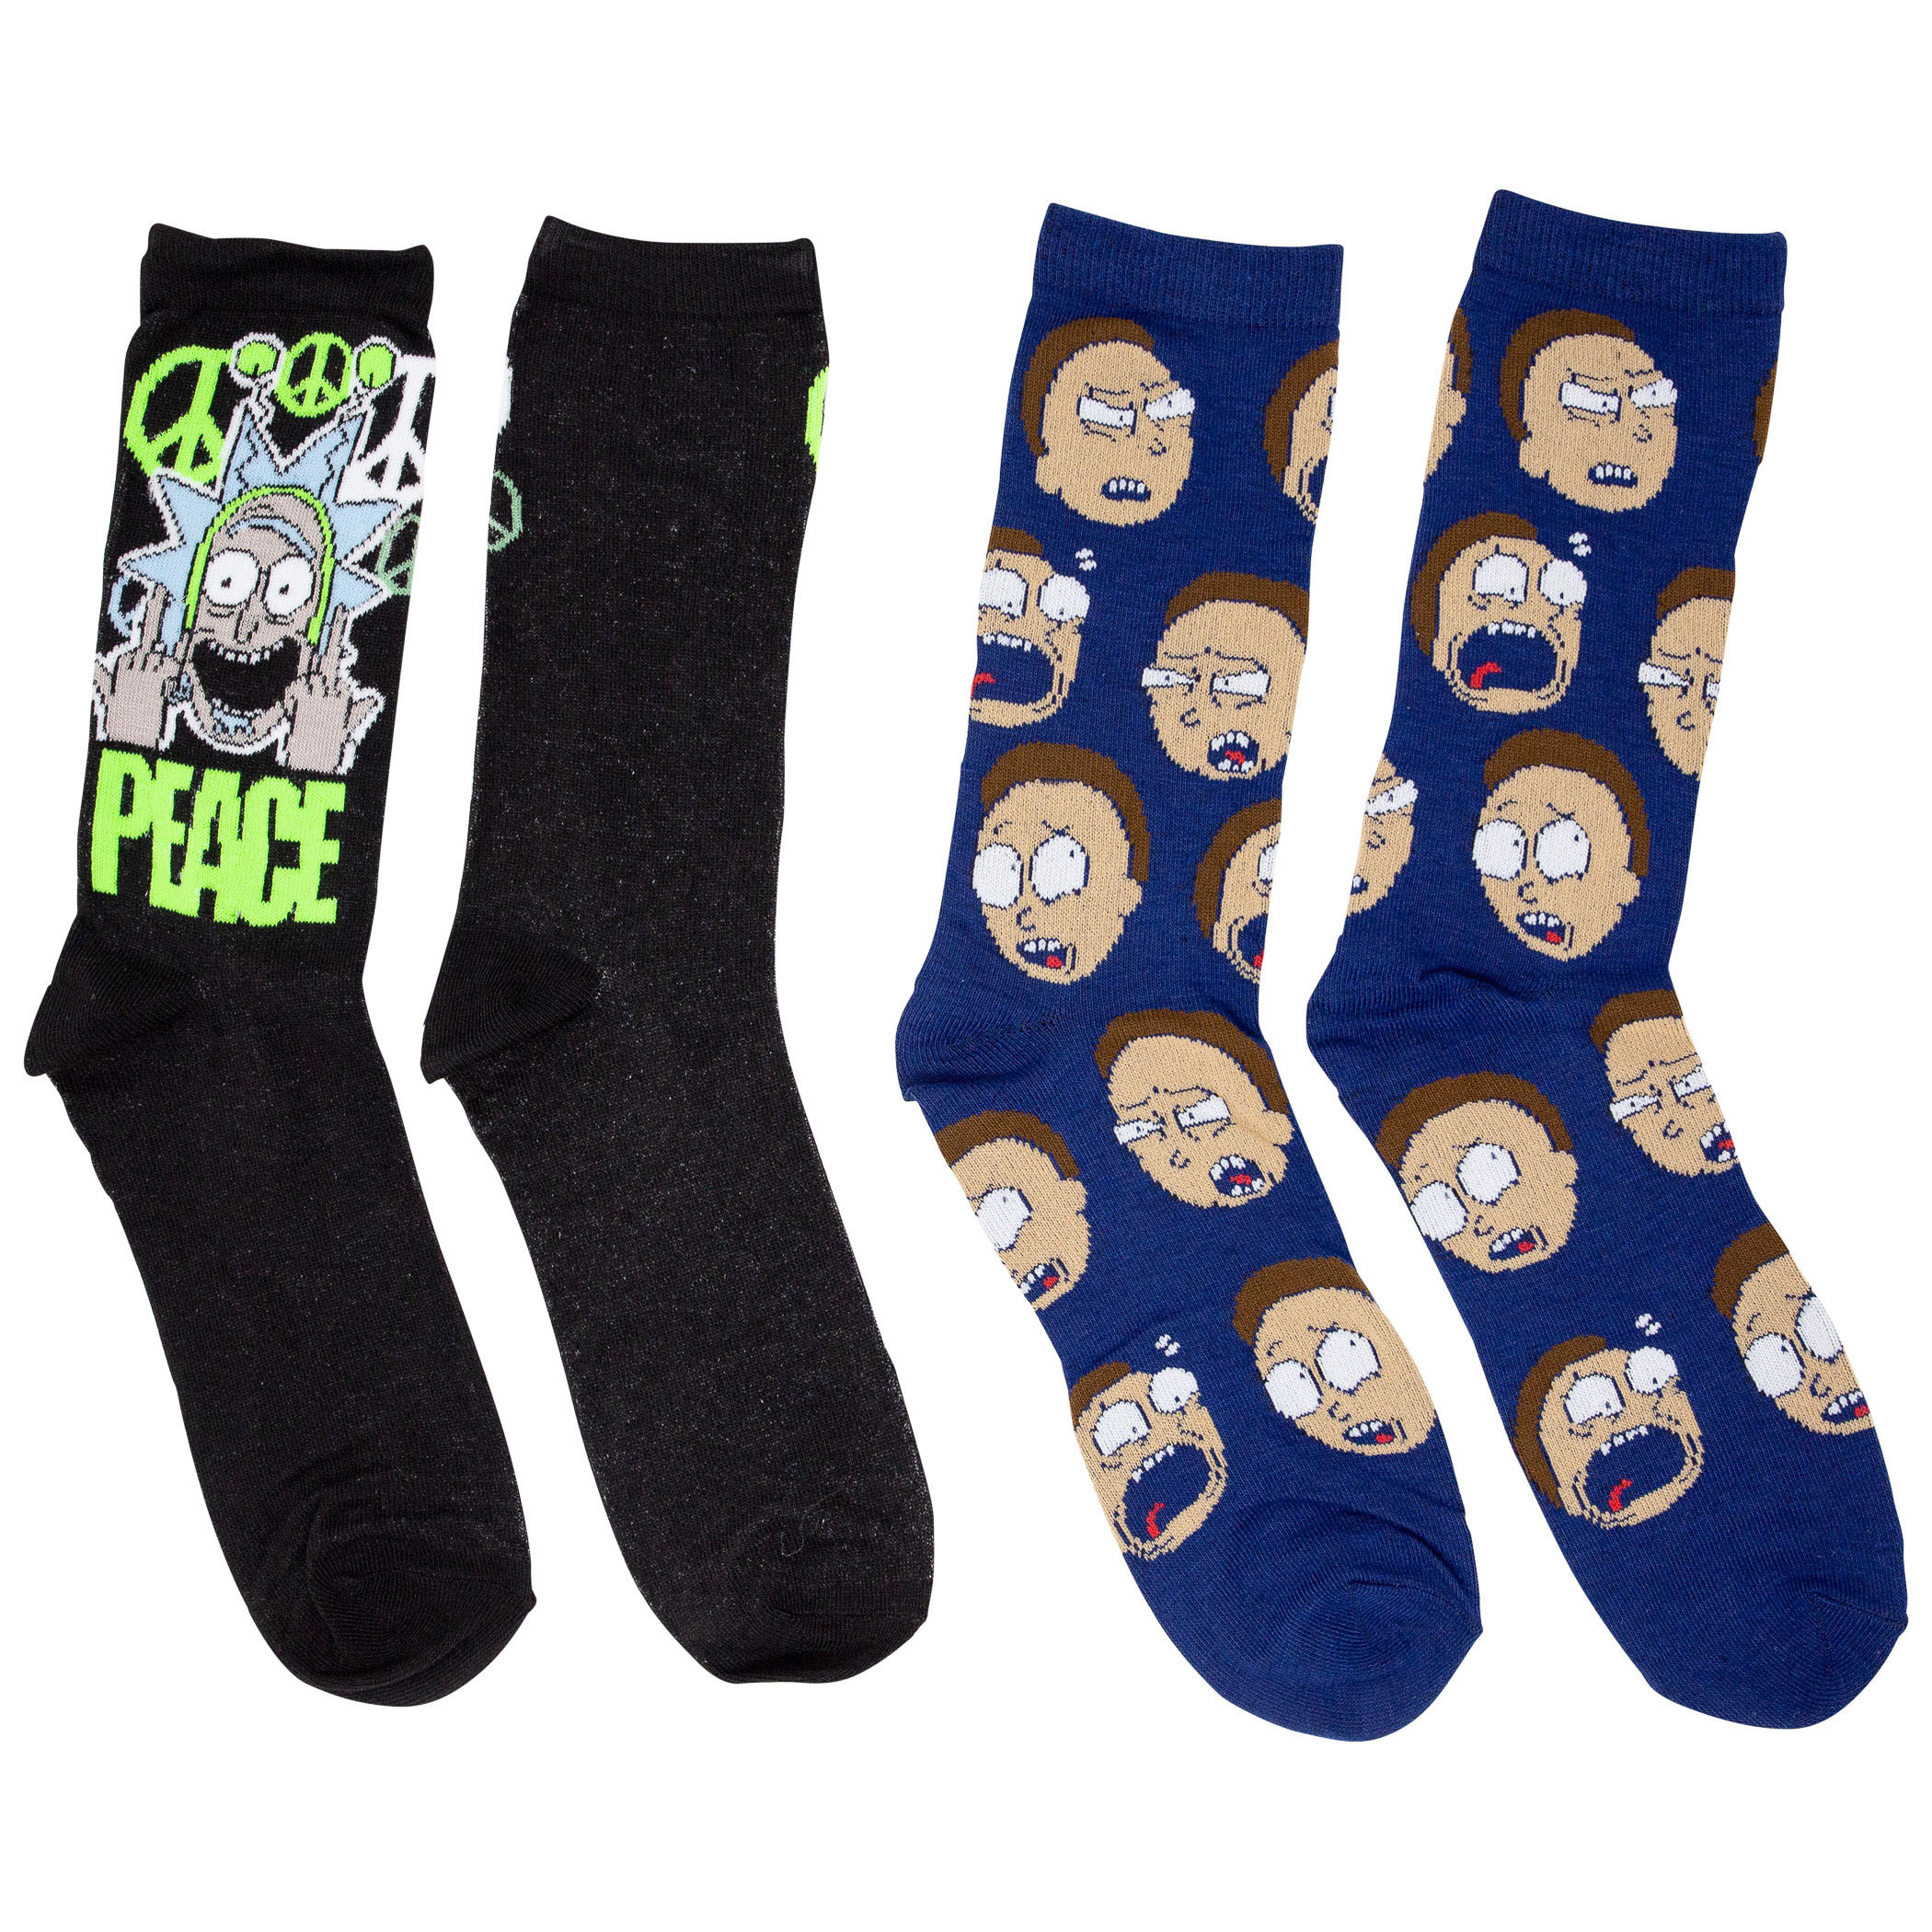 Rick and Morty Peace 2-Pack Crew Socks